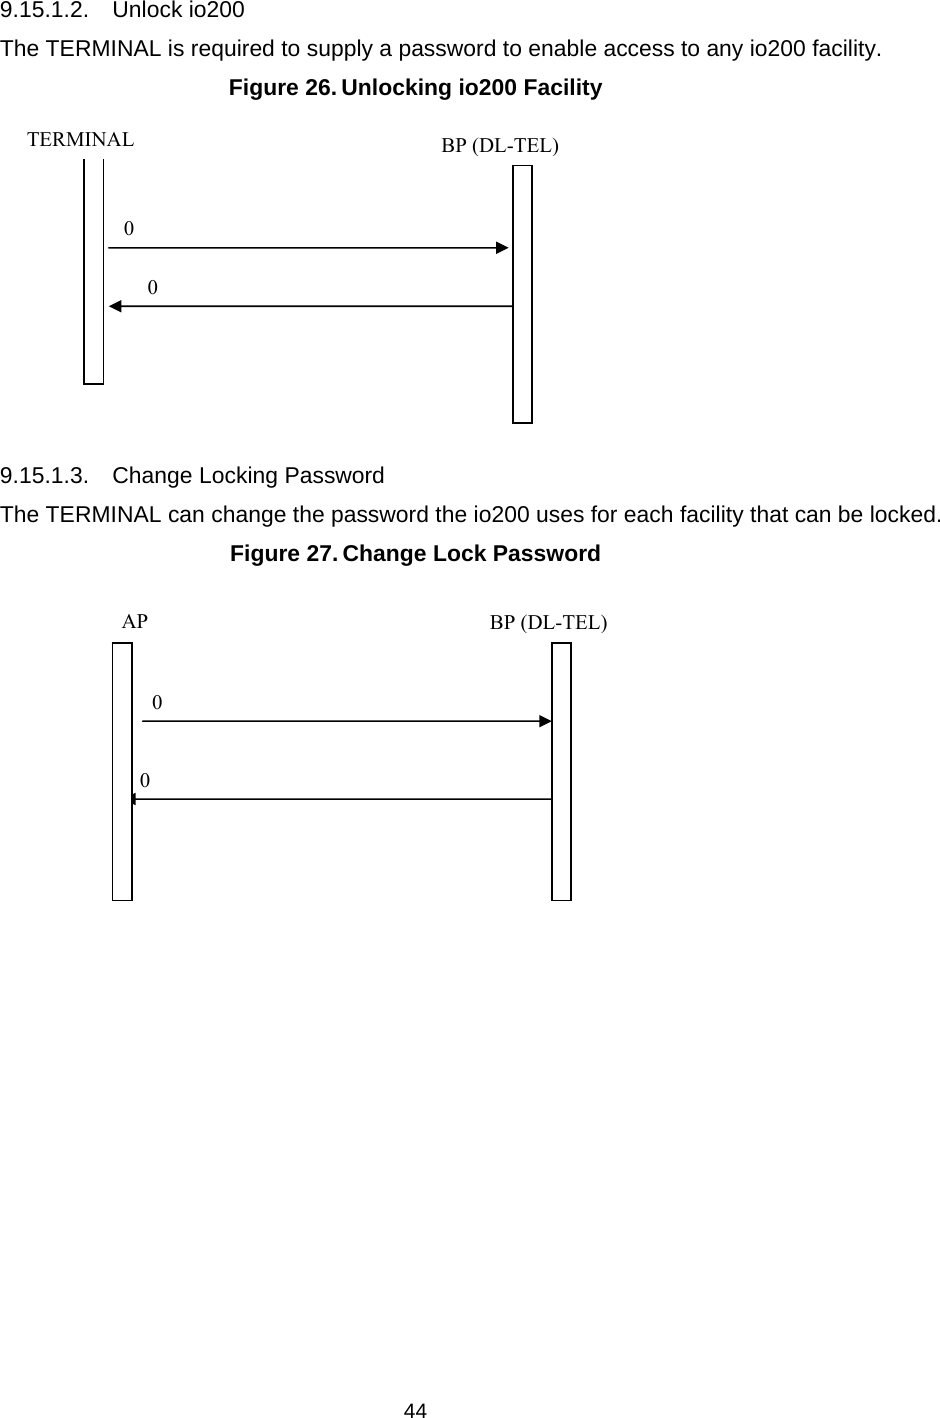   44 9.15.1.2. Unlock io200 The TERMINAL is required to supply a password to enable access to any io200 facility. Figure 26. Unlocking io200 Facility          9.15.1.3.  Change Locking Password The TERMINAL can change the password the io200 uses for each facility that can be locked. Figure 27. Change Lock Password          0 0 0 0 AP BP (DL-TEL)BP (DL-TEL)TERMINAL 